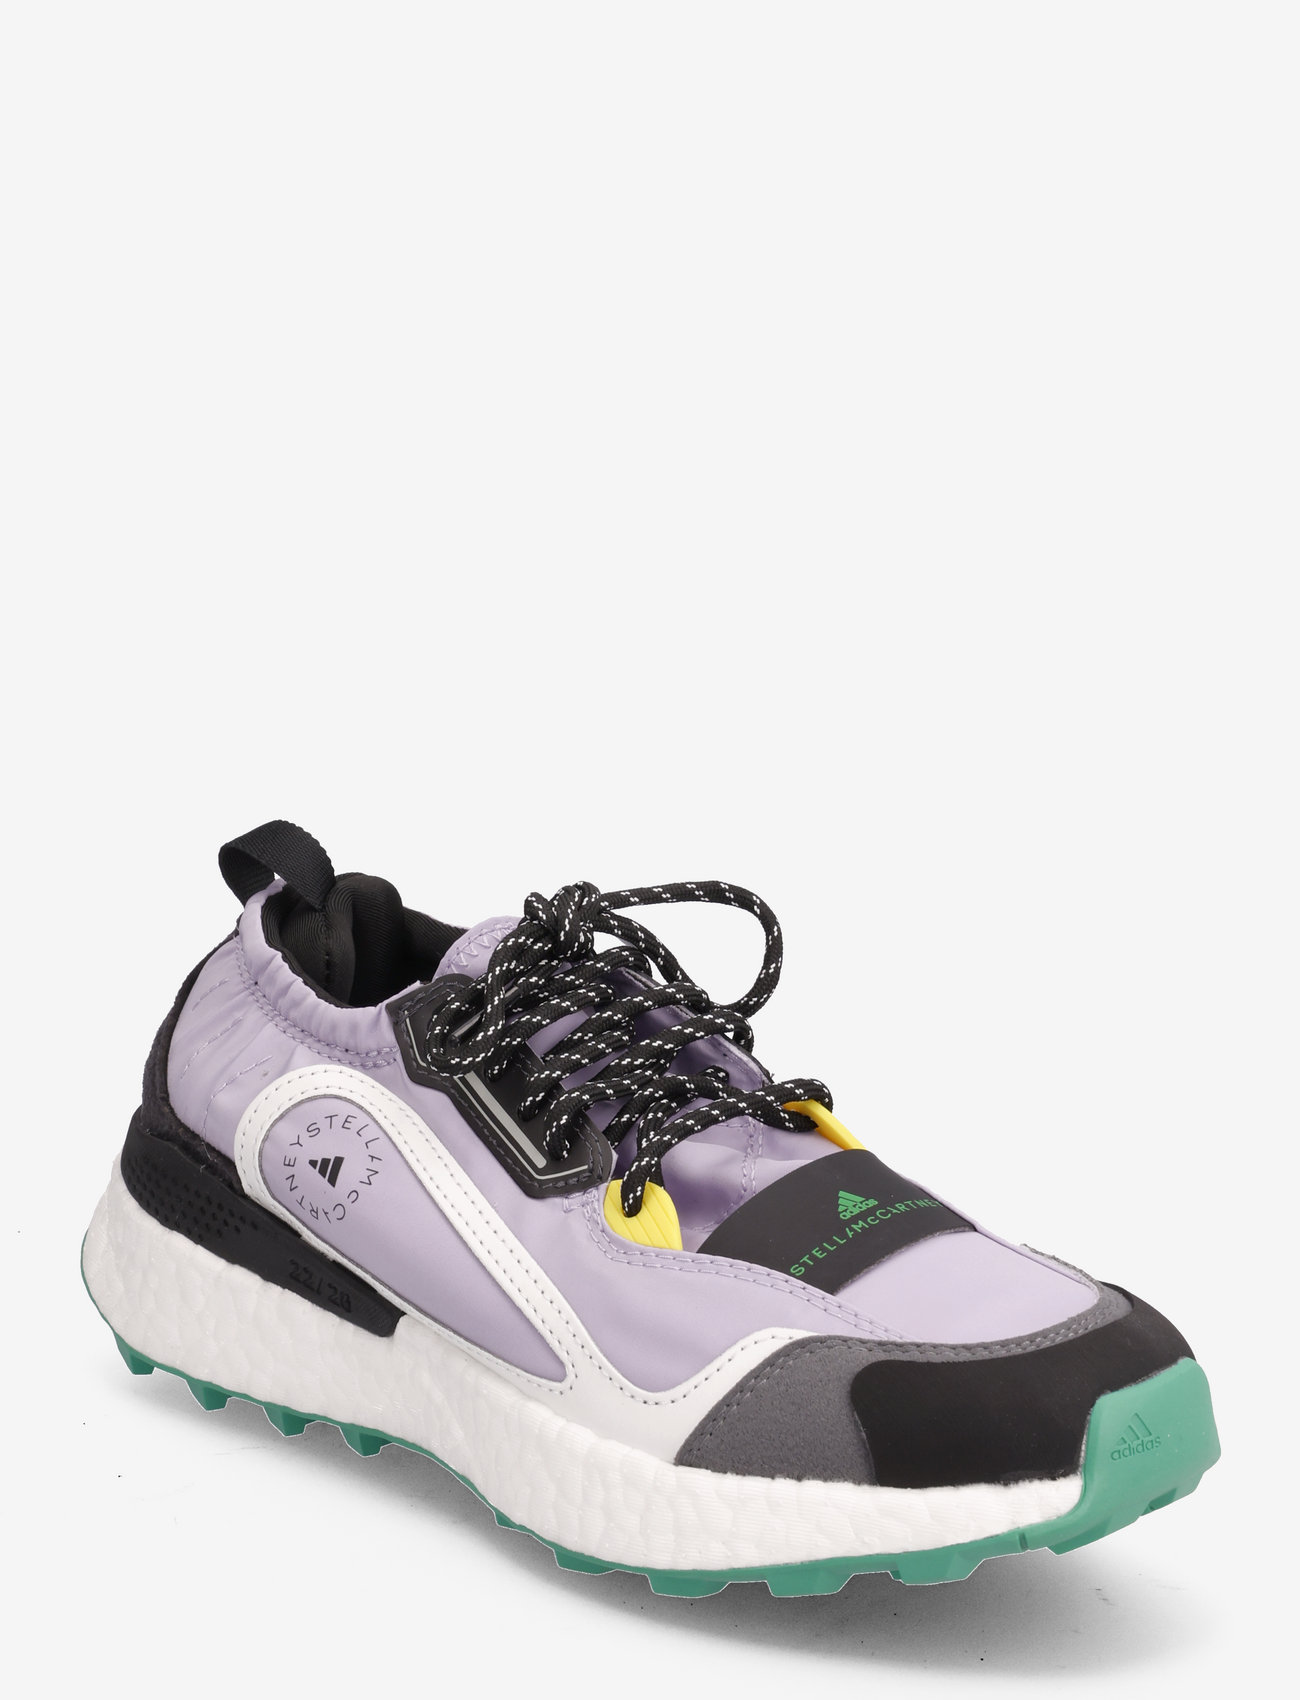 adidas by Stella Adidas By Stella Mccartney Outdoorboost 2.0 Cold.rdy Shoes (Shipur/ftwwht/green), (130 €) | selection of outlet-styles | Booztlet.com